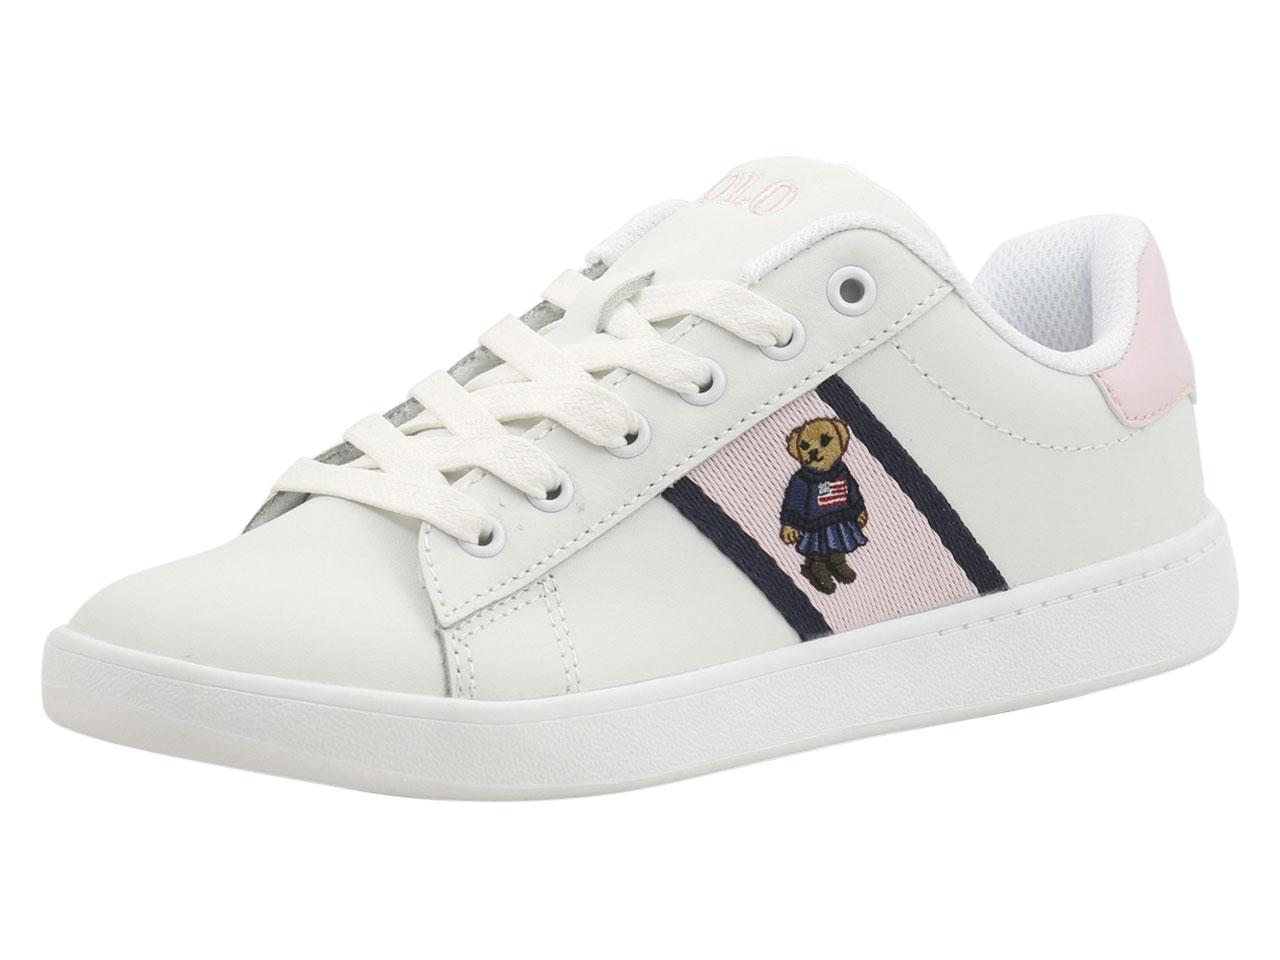 polo quilton bear shoes - 60% OFF 